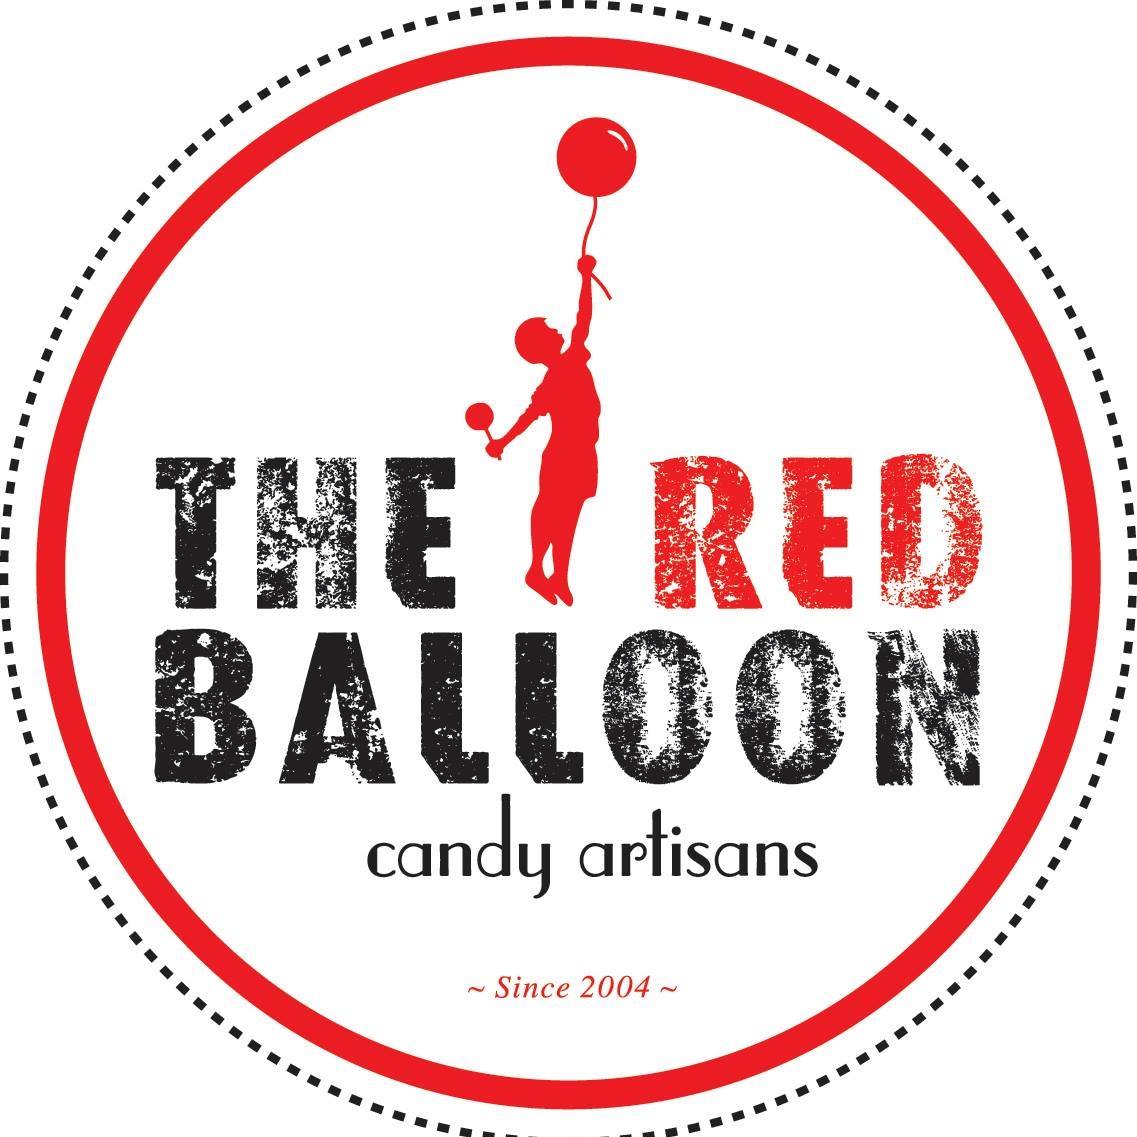 The Red balloon